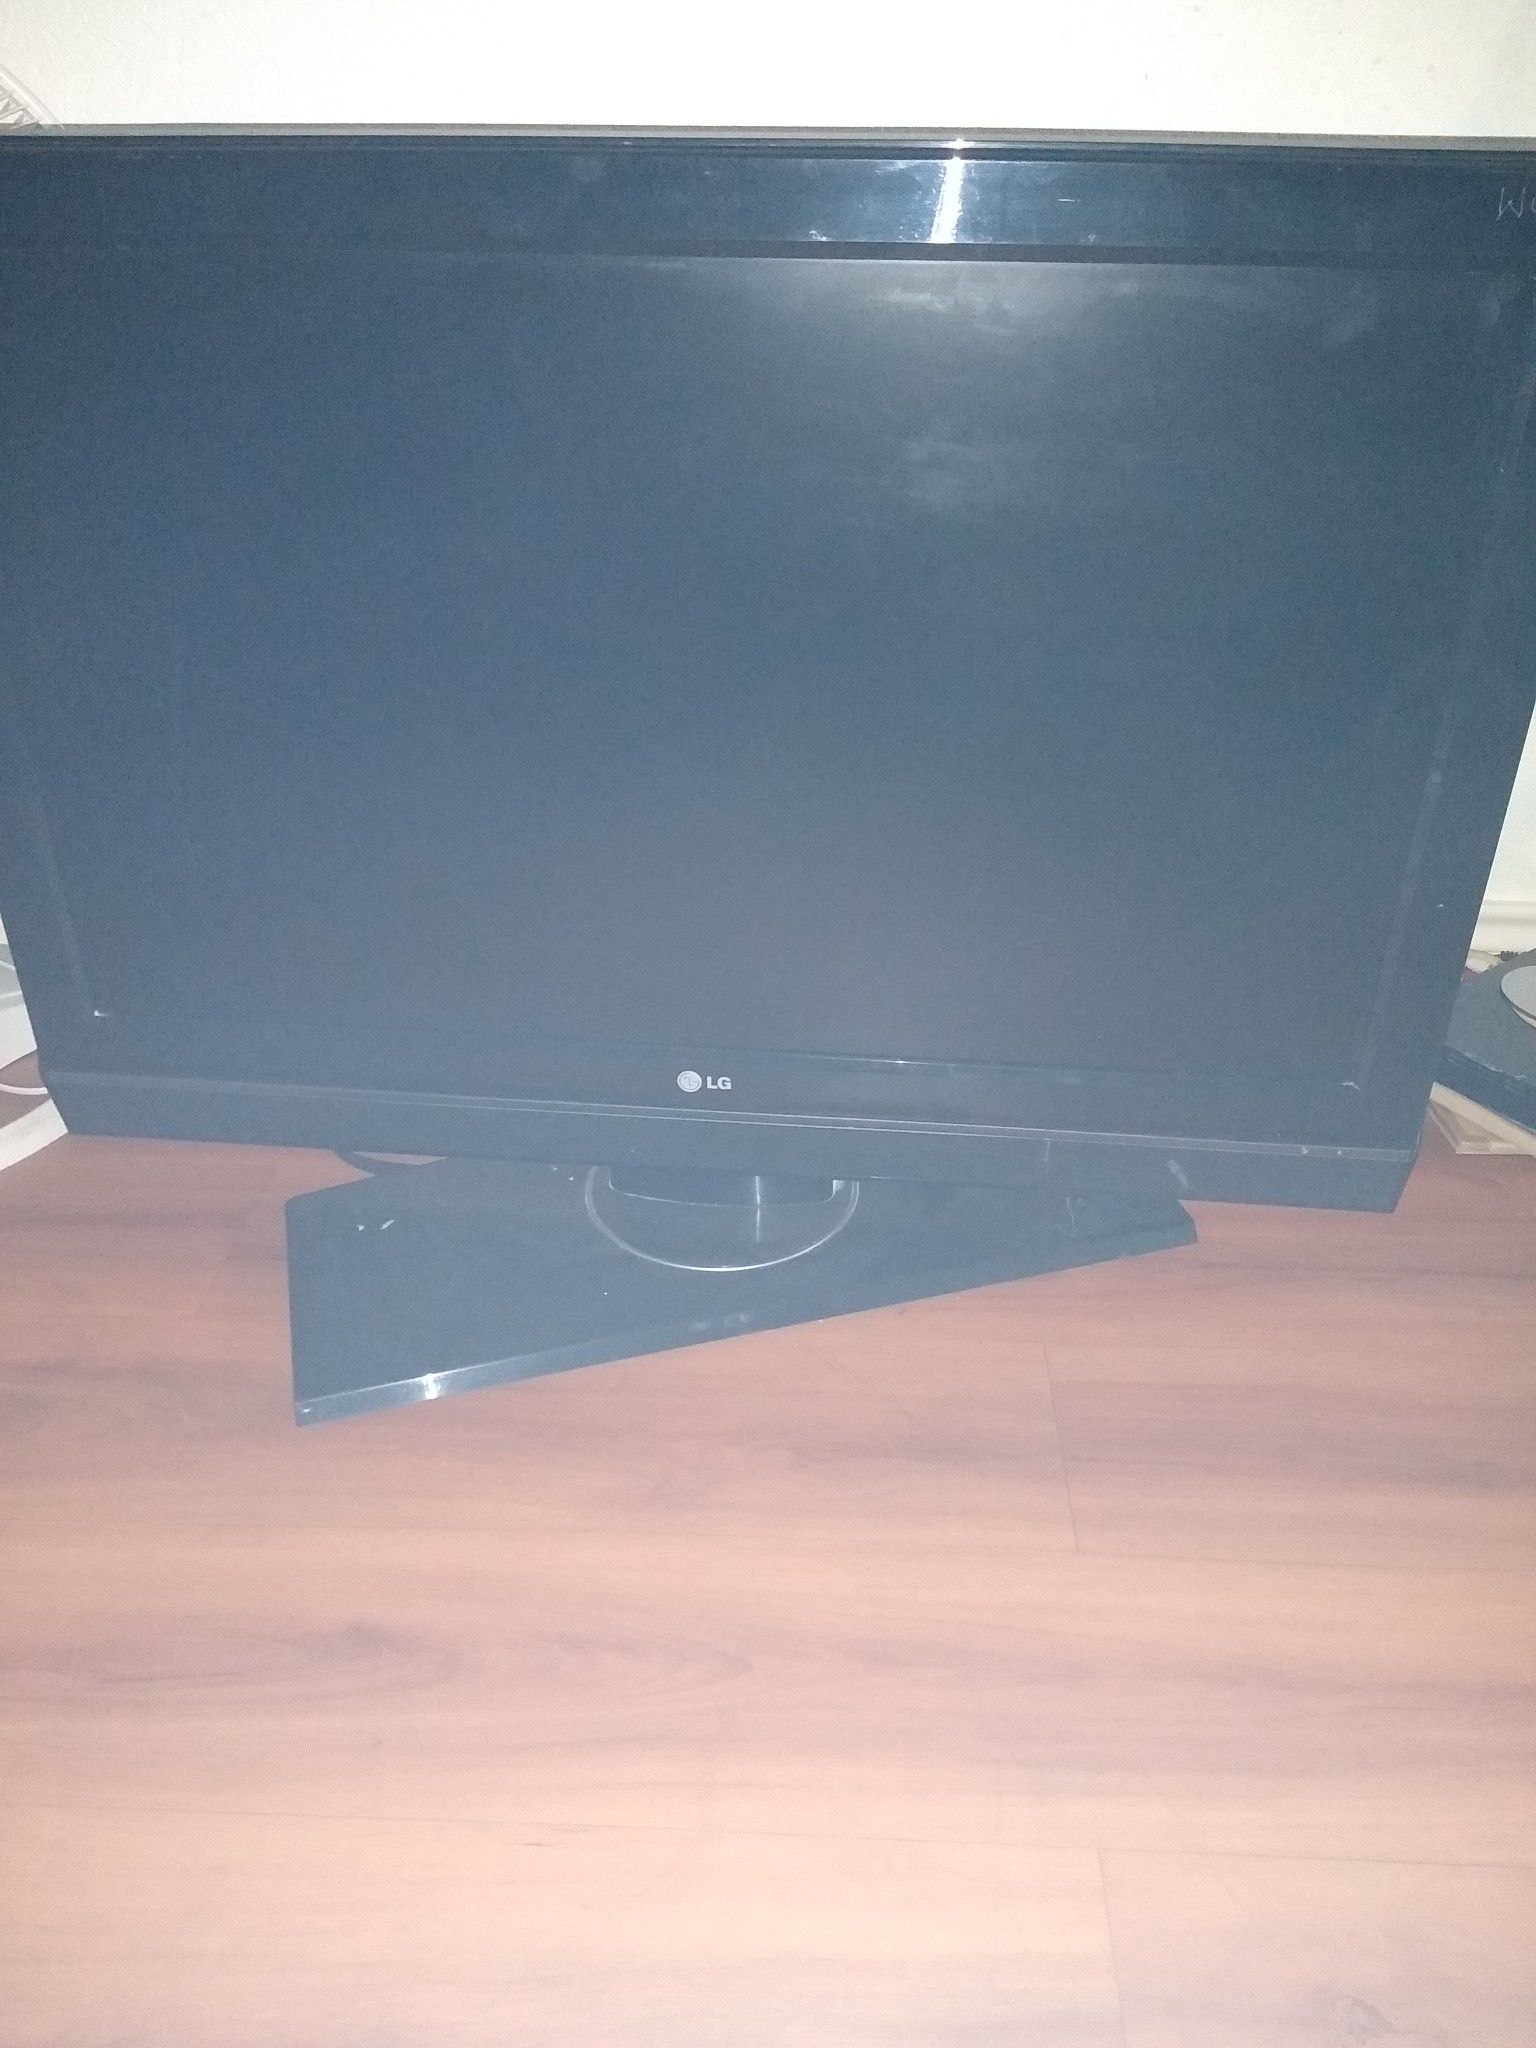 42in LG tv w/stand